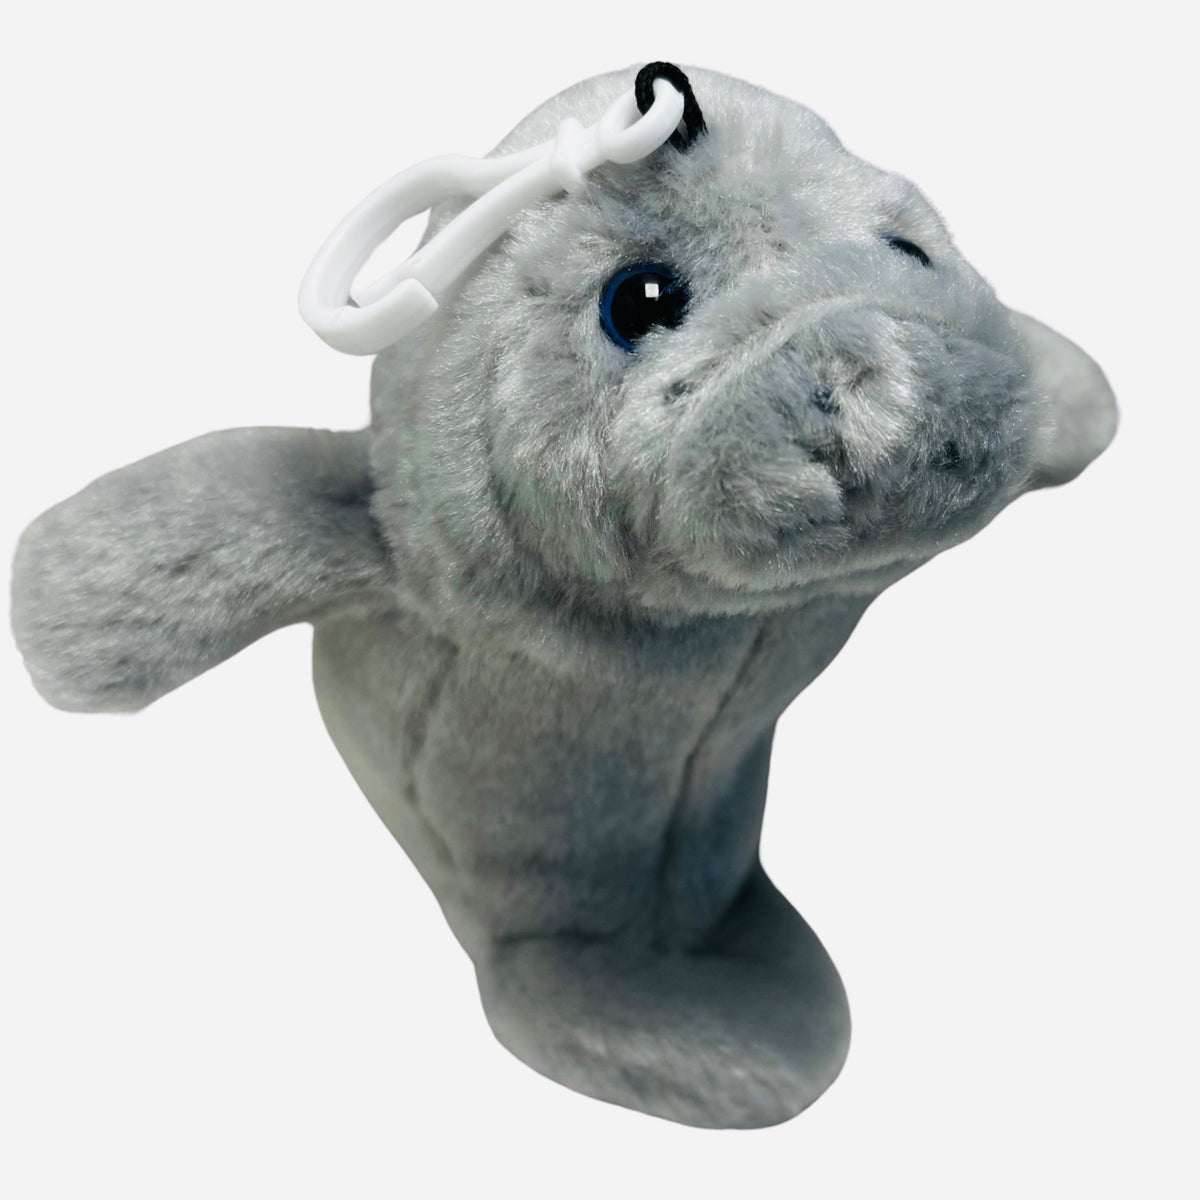 5" Wishpets Manatee Toy Mini Plush - w/Clip for Backpack